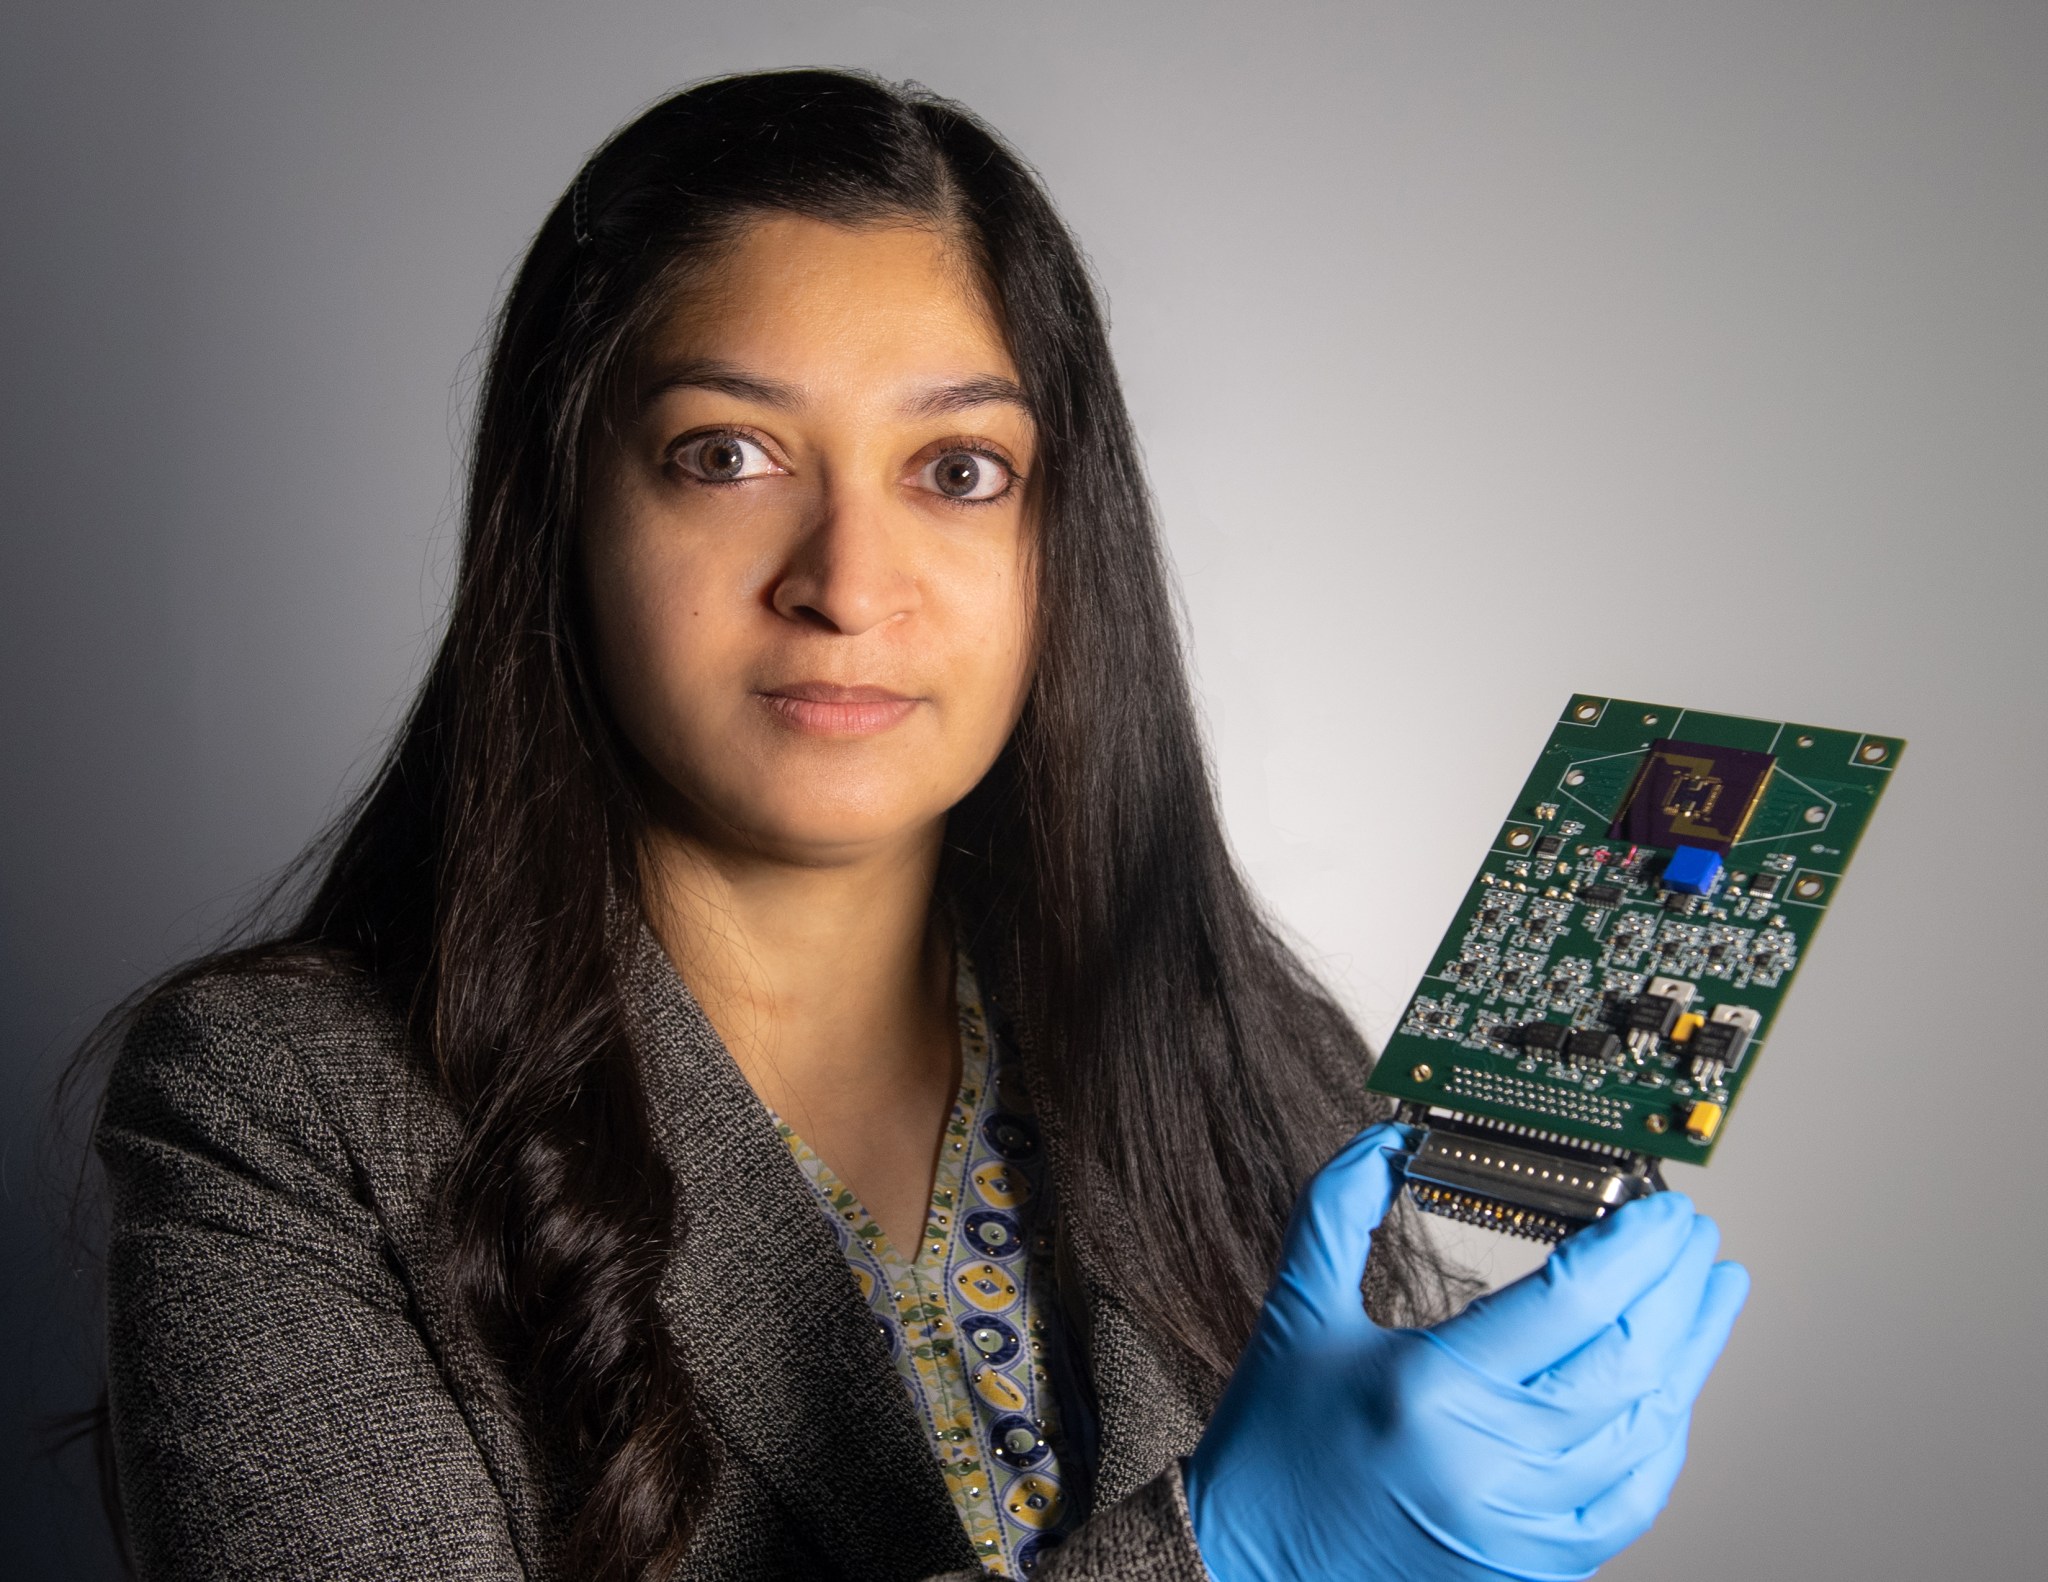 Technologist Mahmooda Sultana, woman with tan skin and black hair holds a sensor platform with several computer microchips